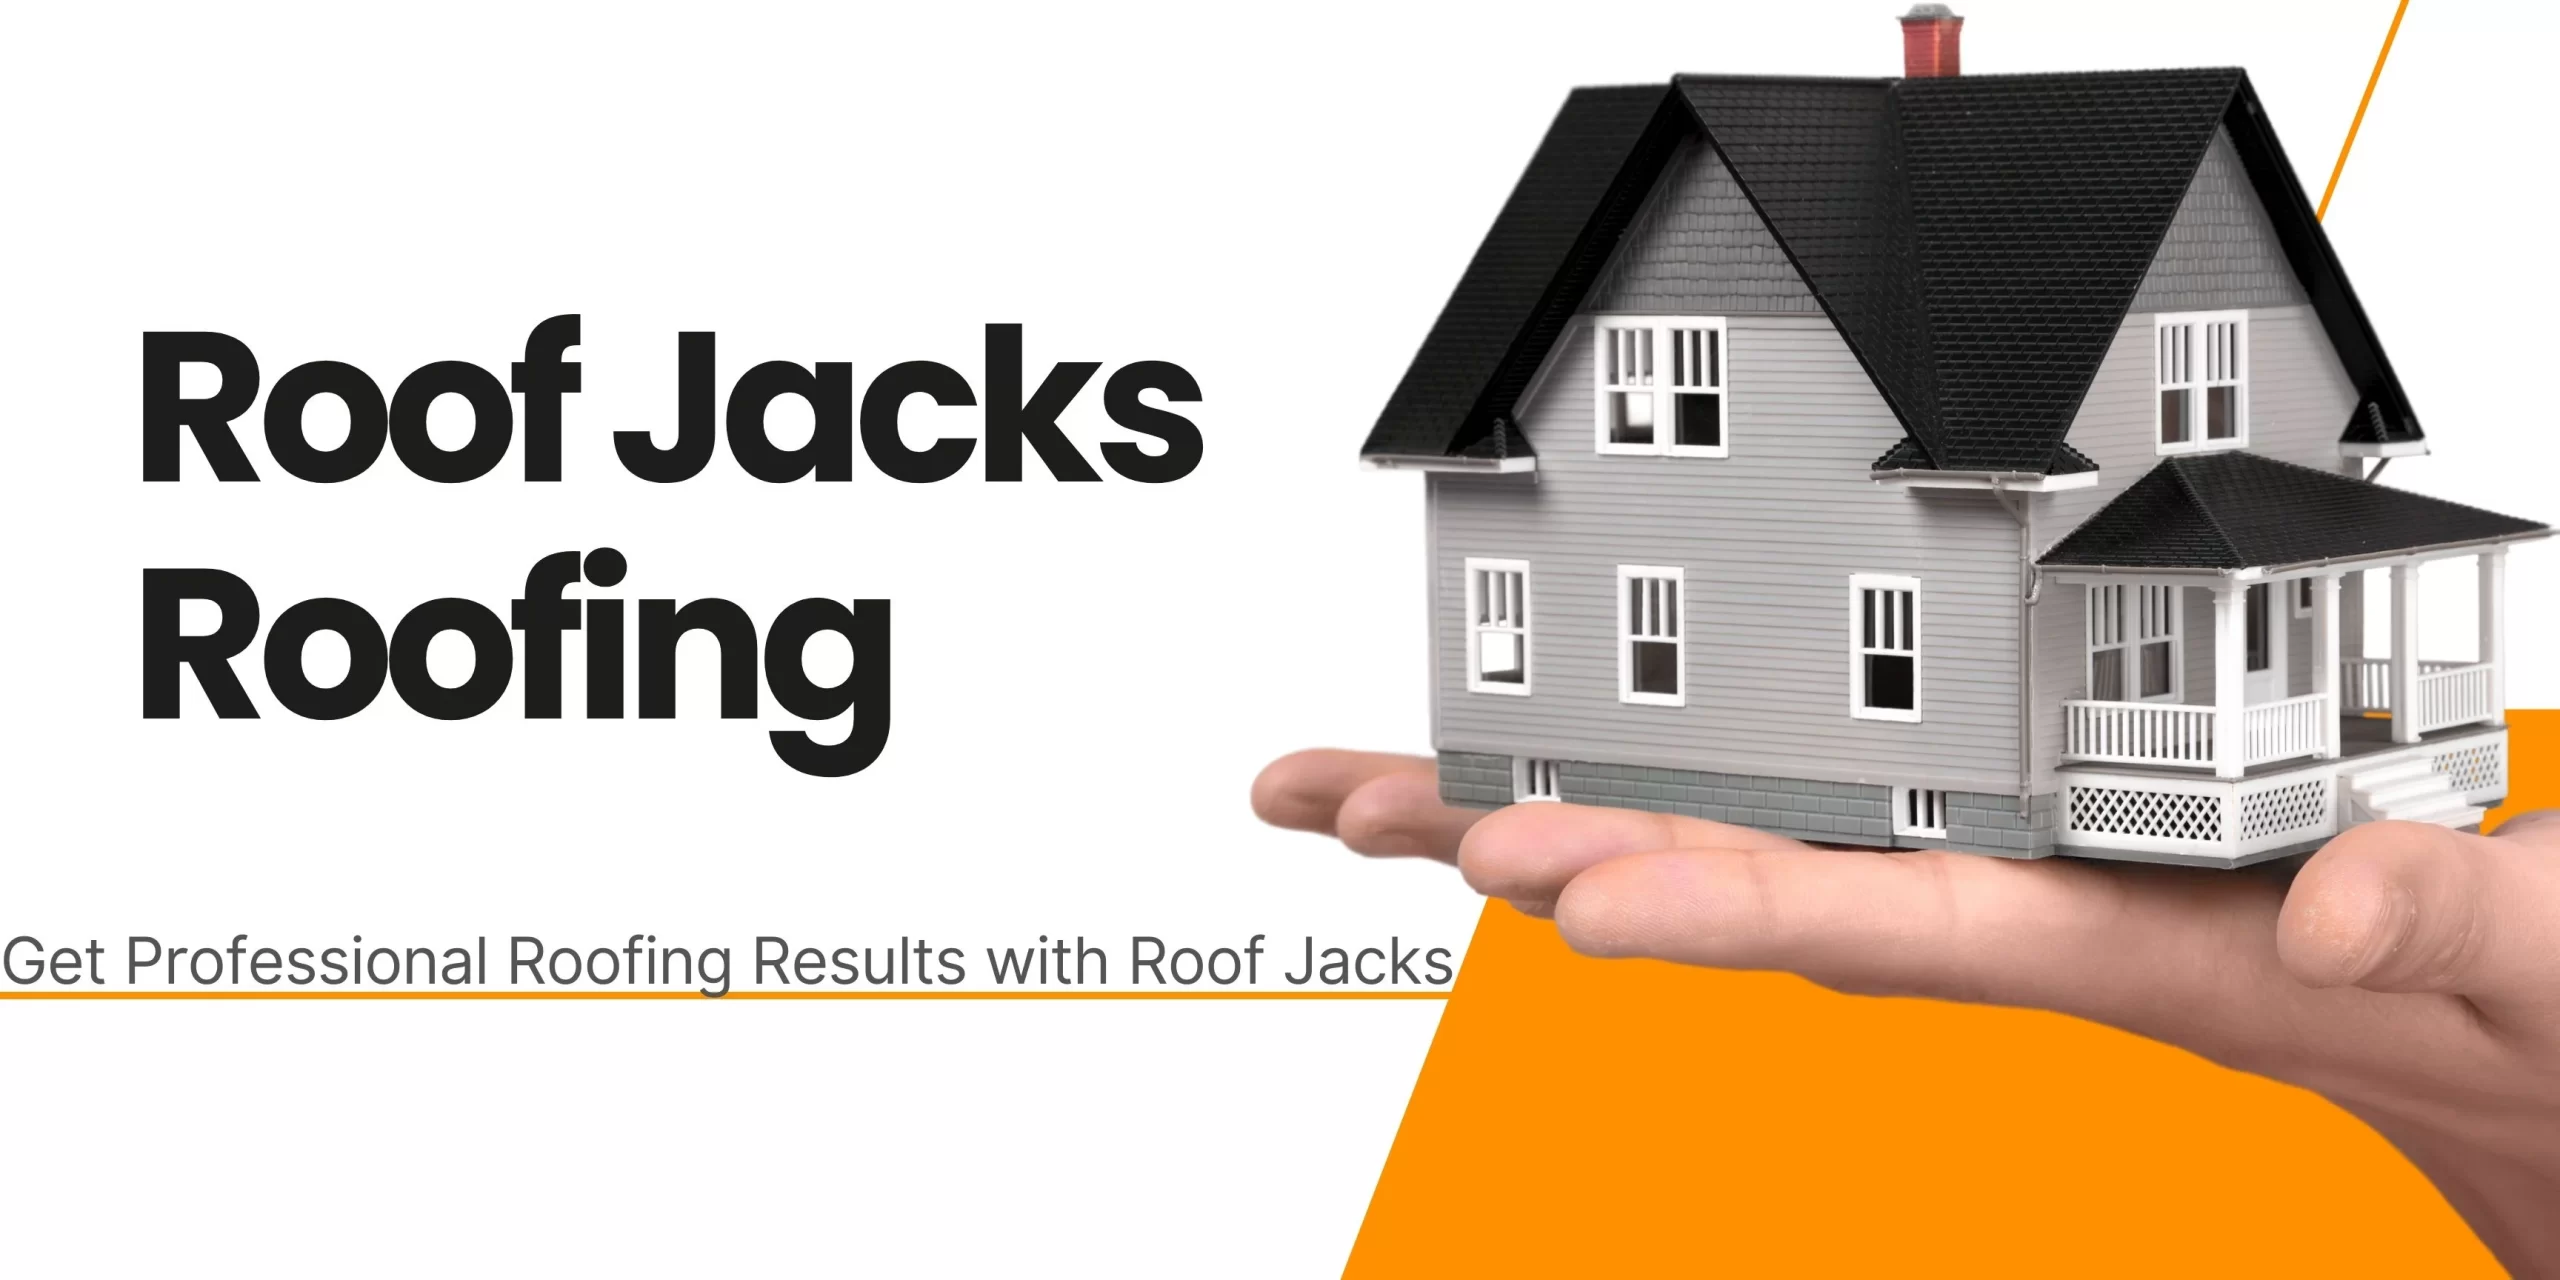 Get Professional Roofing Results with Roof Jacks